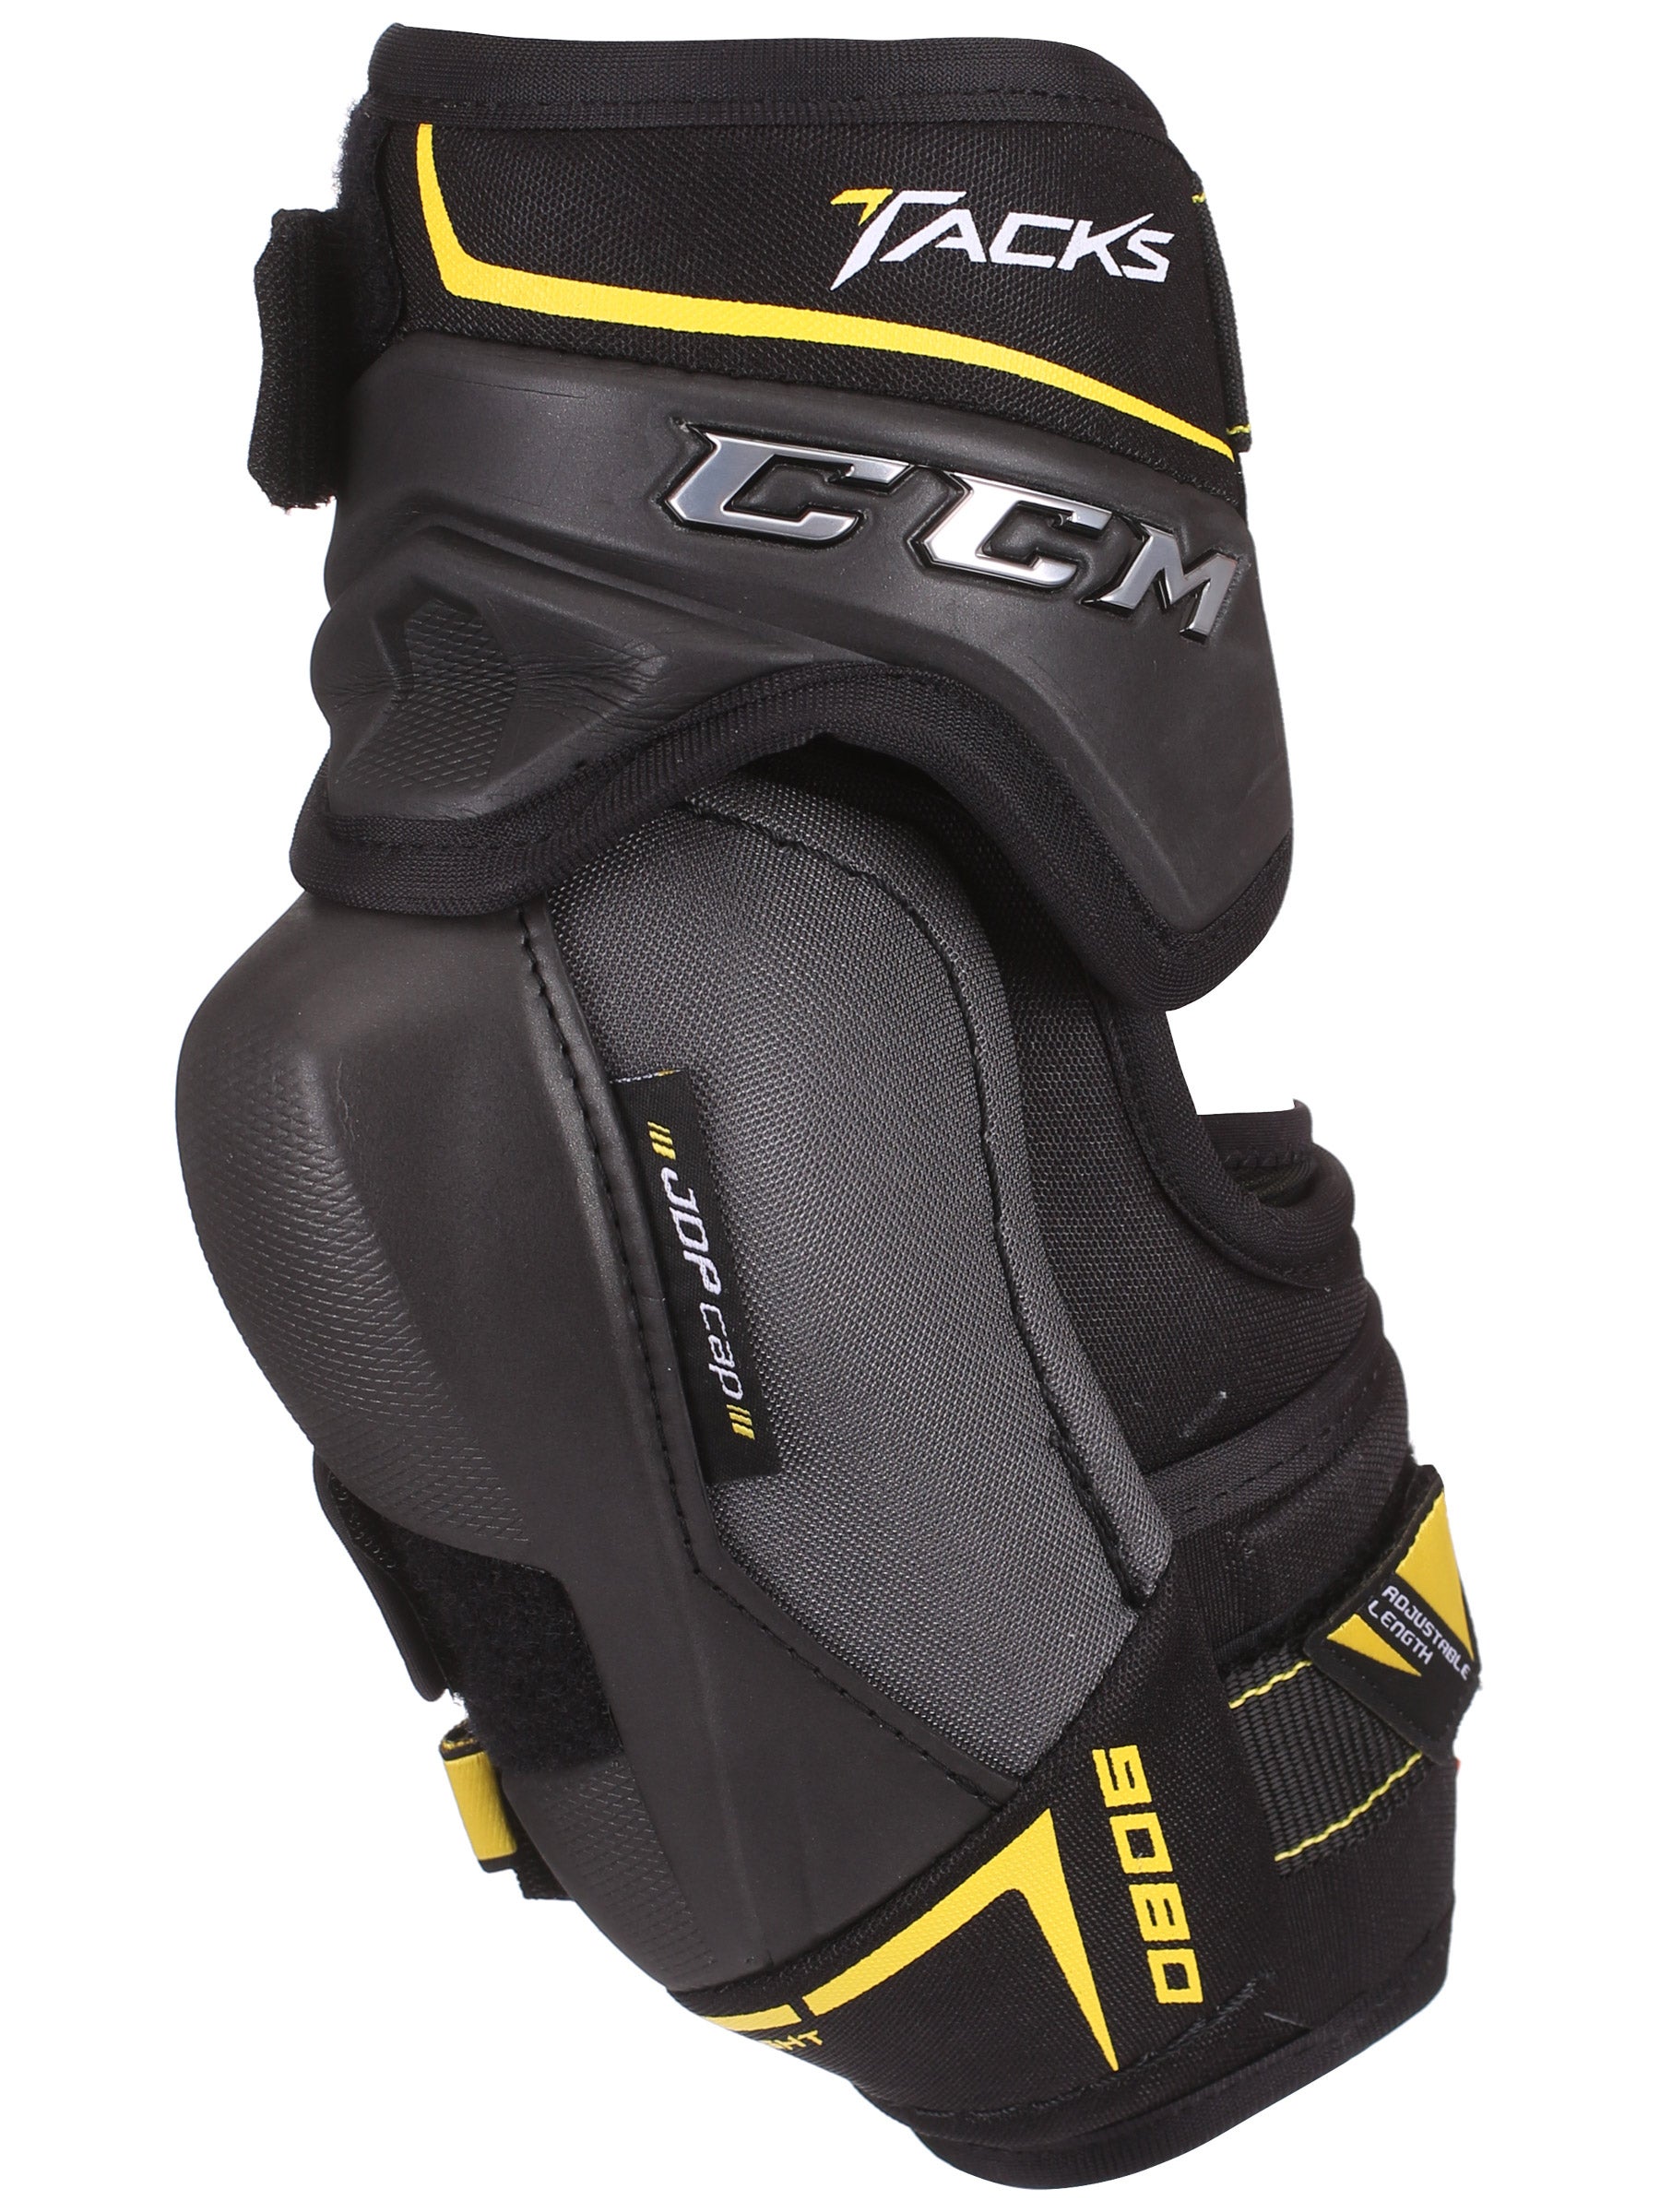 New CCM TACKS 5092 Senior Small Elbow Pads Ice Hockey Fits 5'4" to 5'7" 